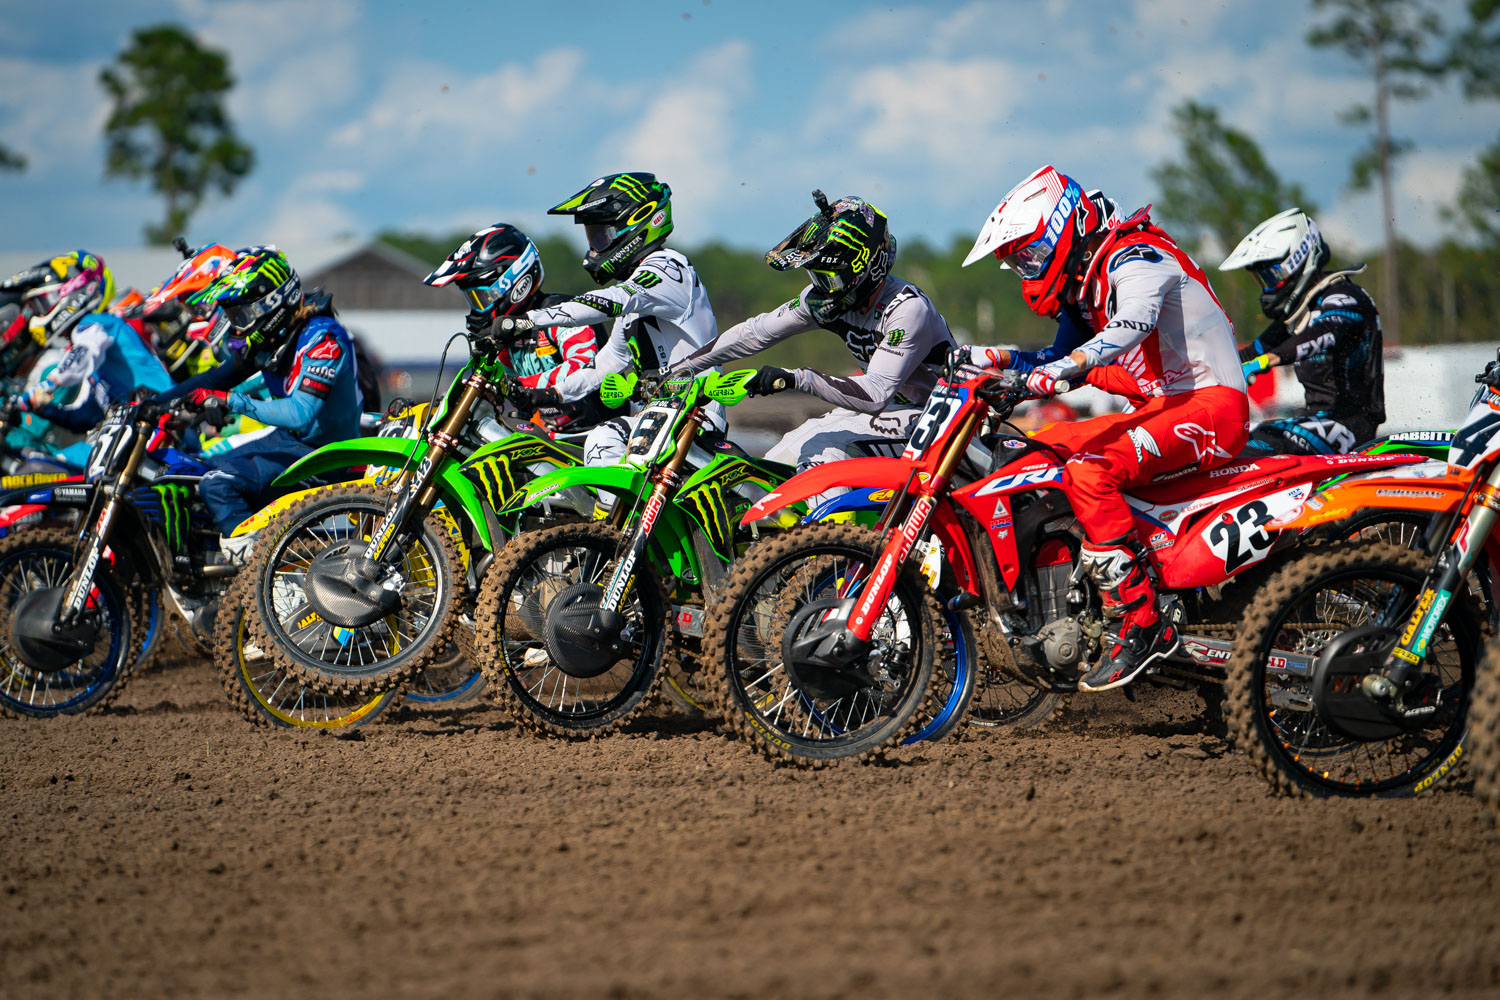 2020 Florida Motocross Race Highlights & Results | Swapmoto Live